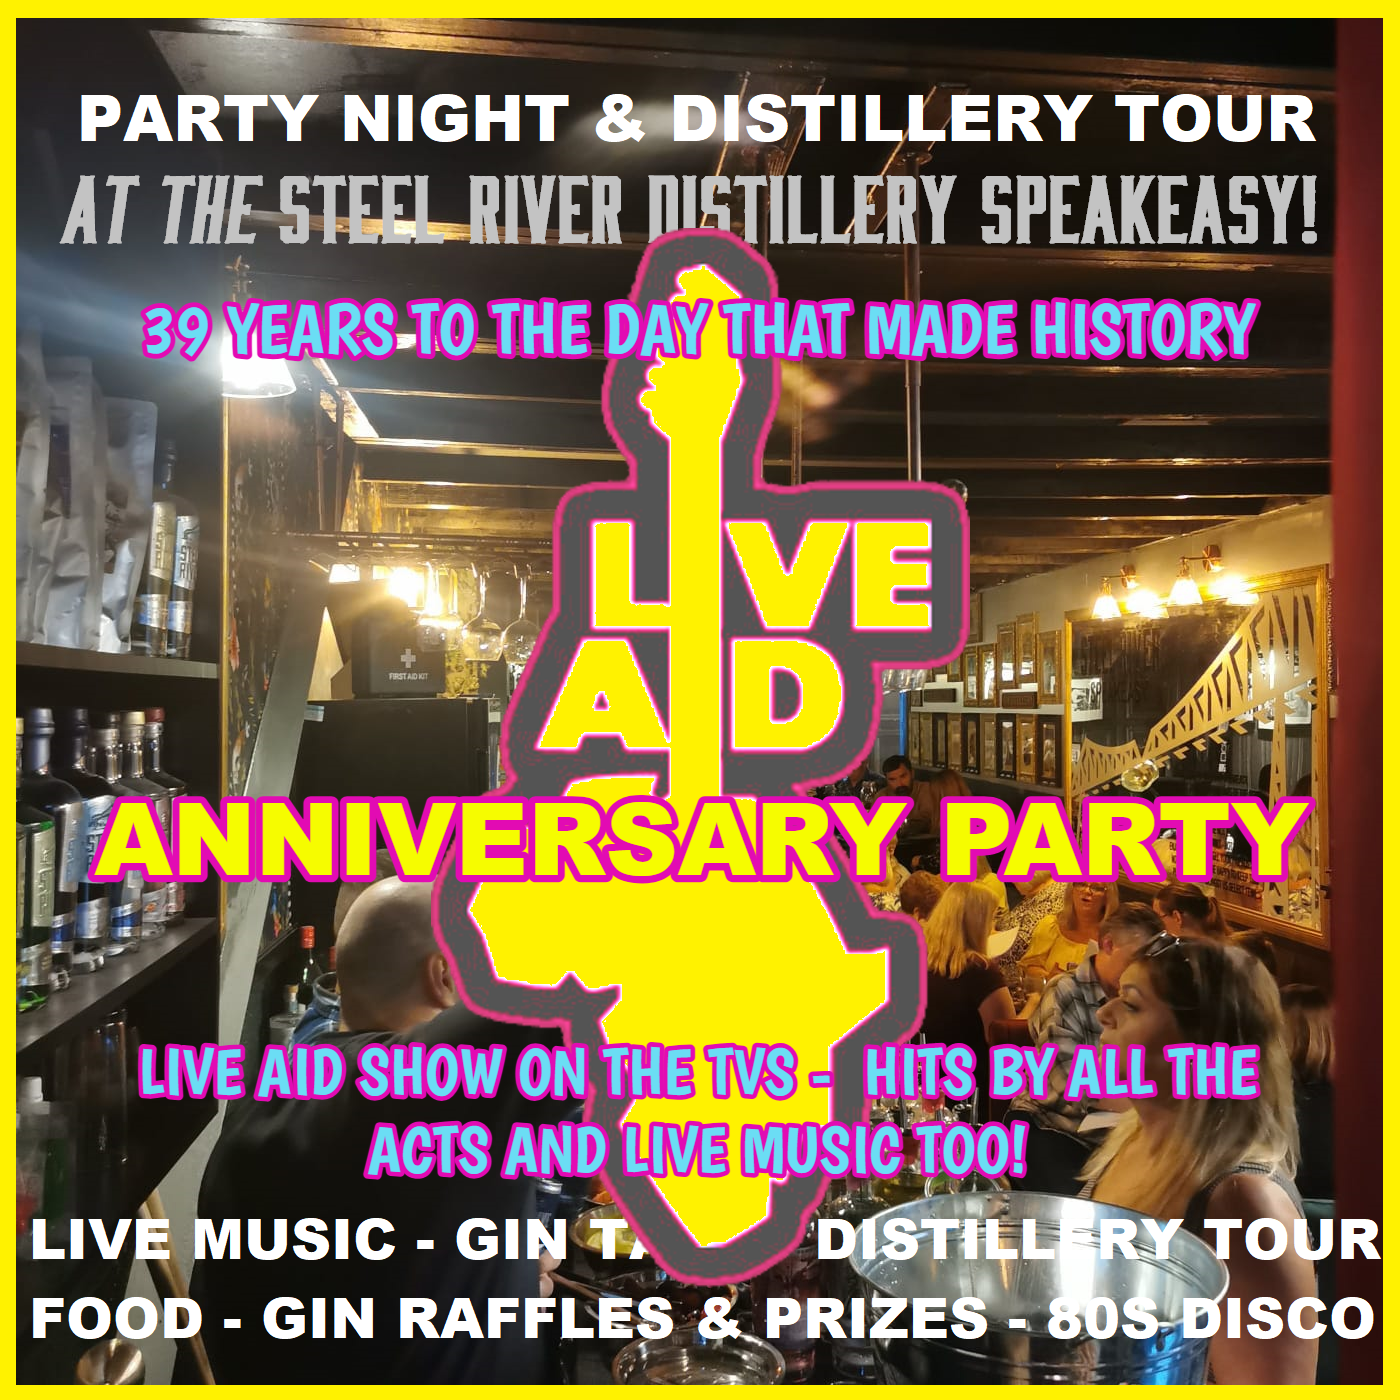 LIVE AID PARTY NIGHT PAGE IMAGE